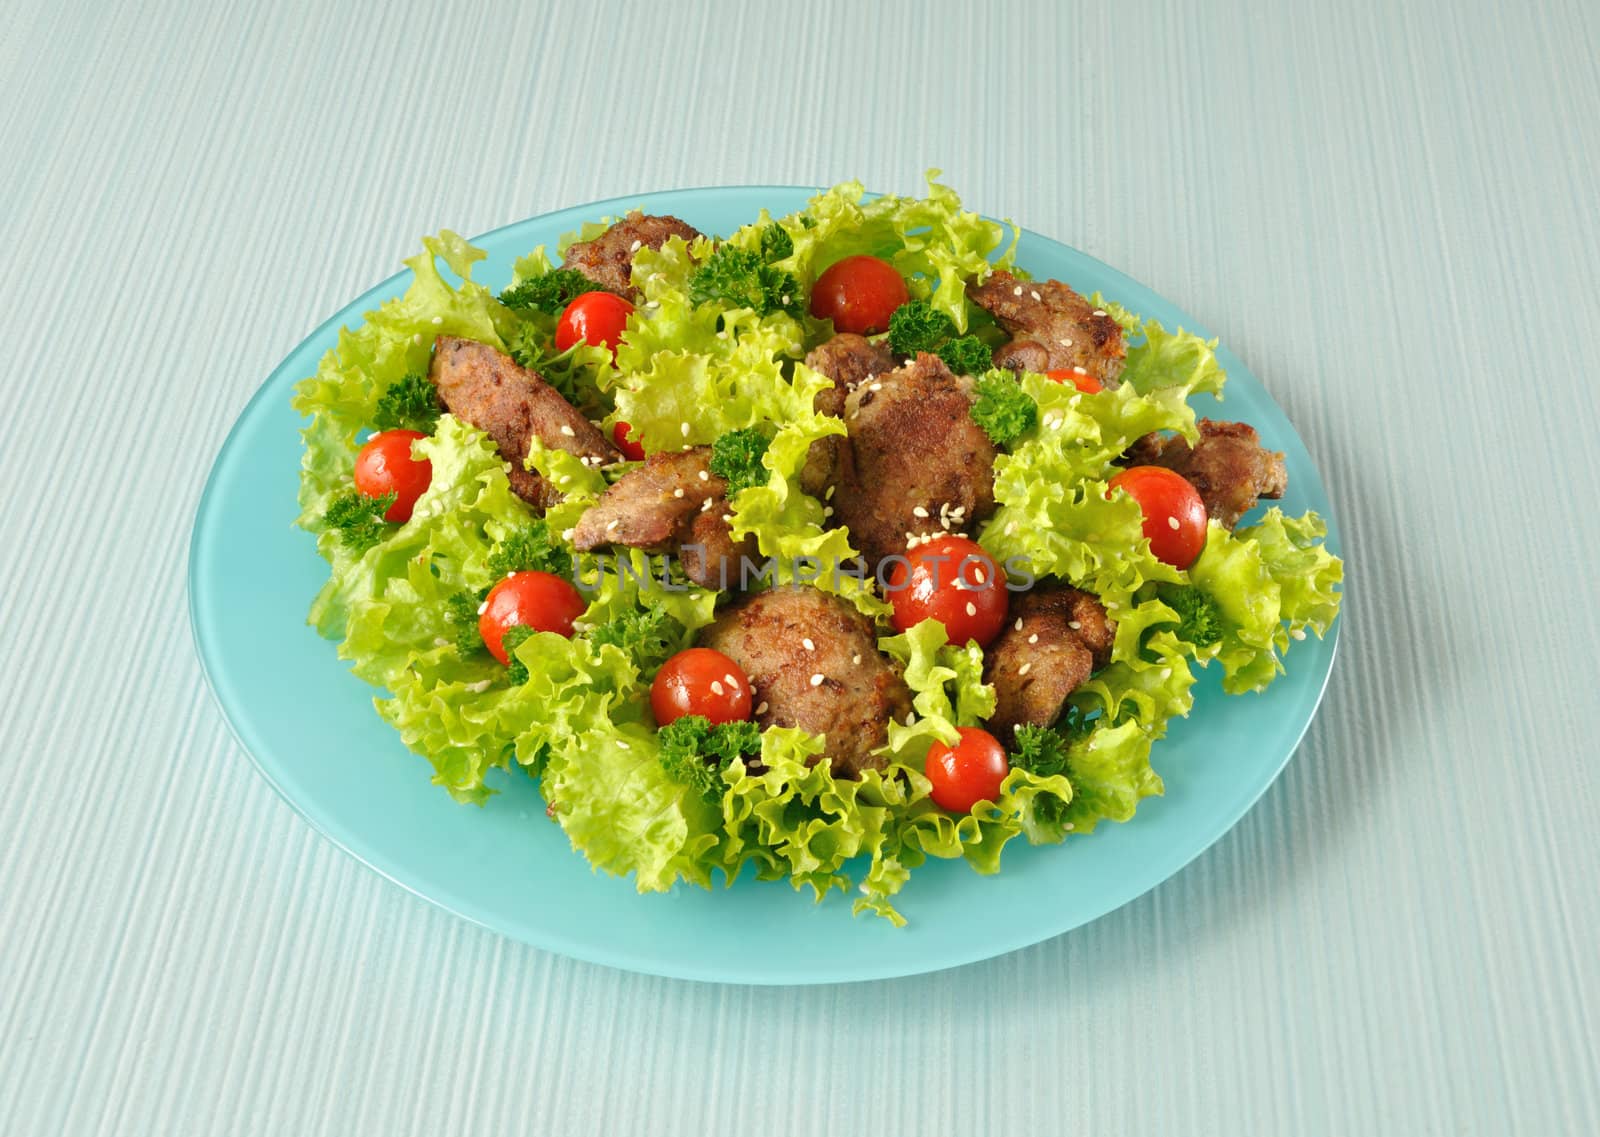 Green salad with chicken liver by Apolonia